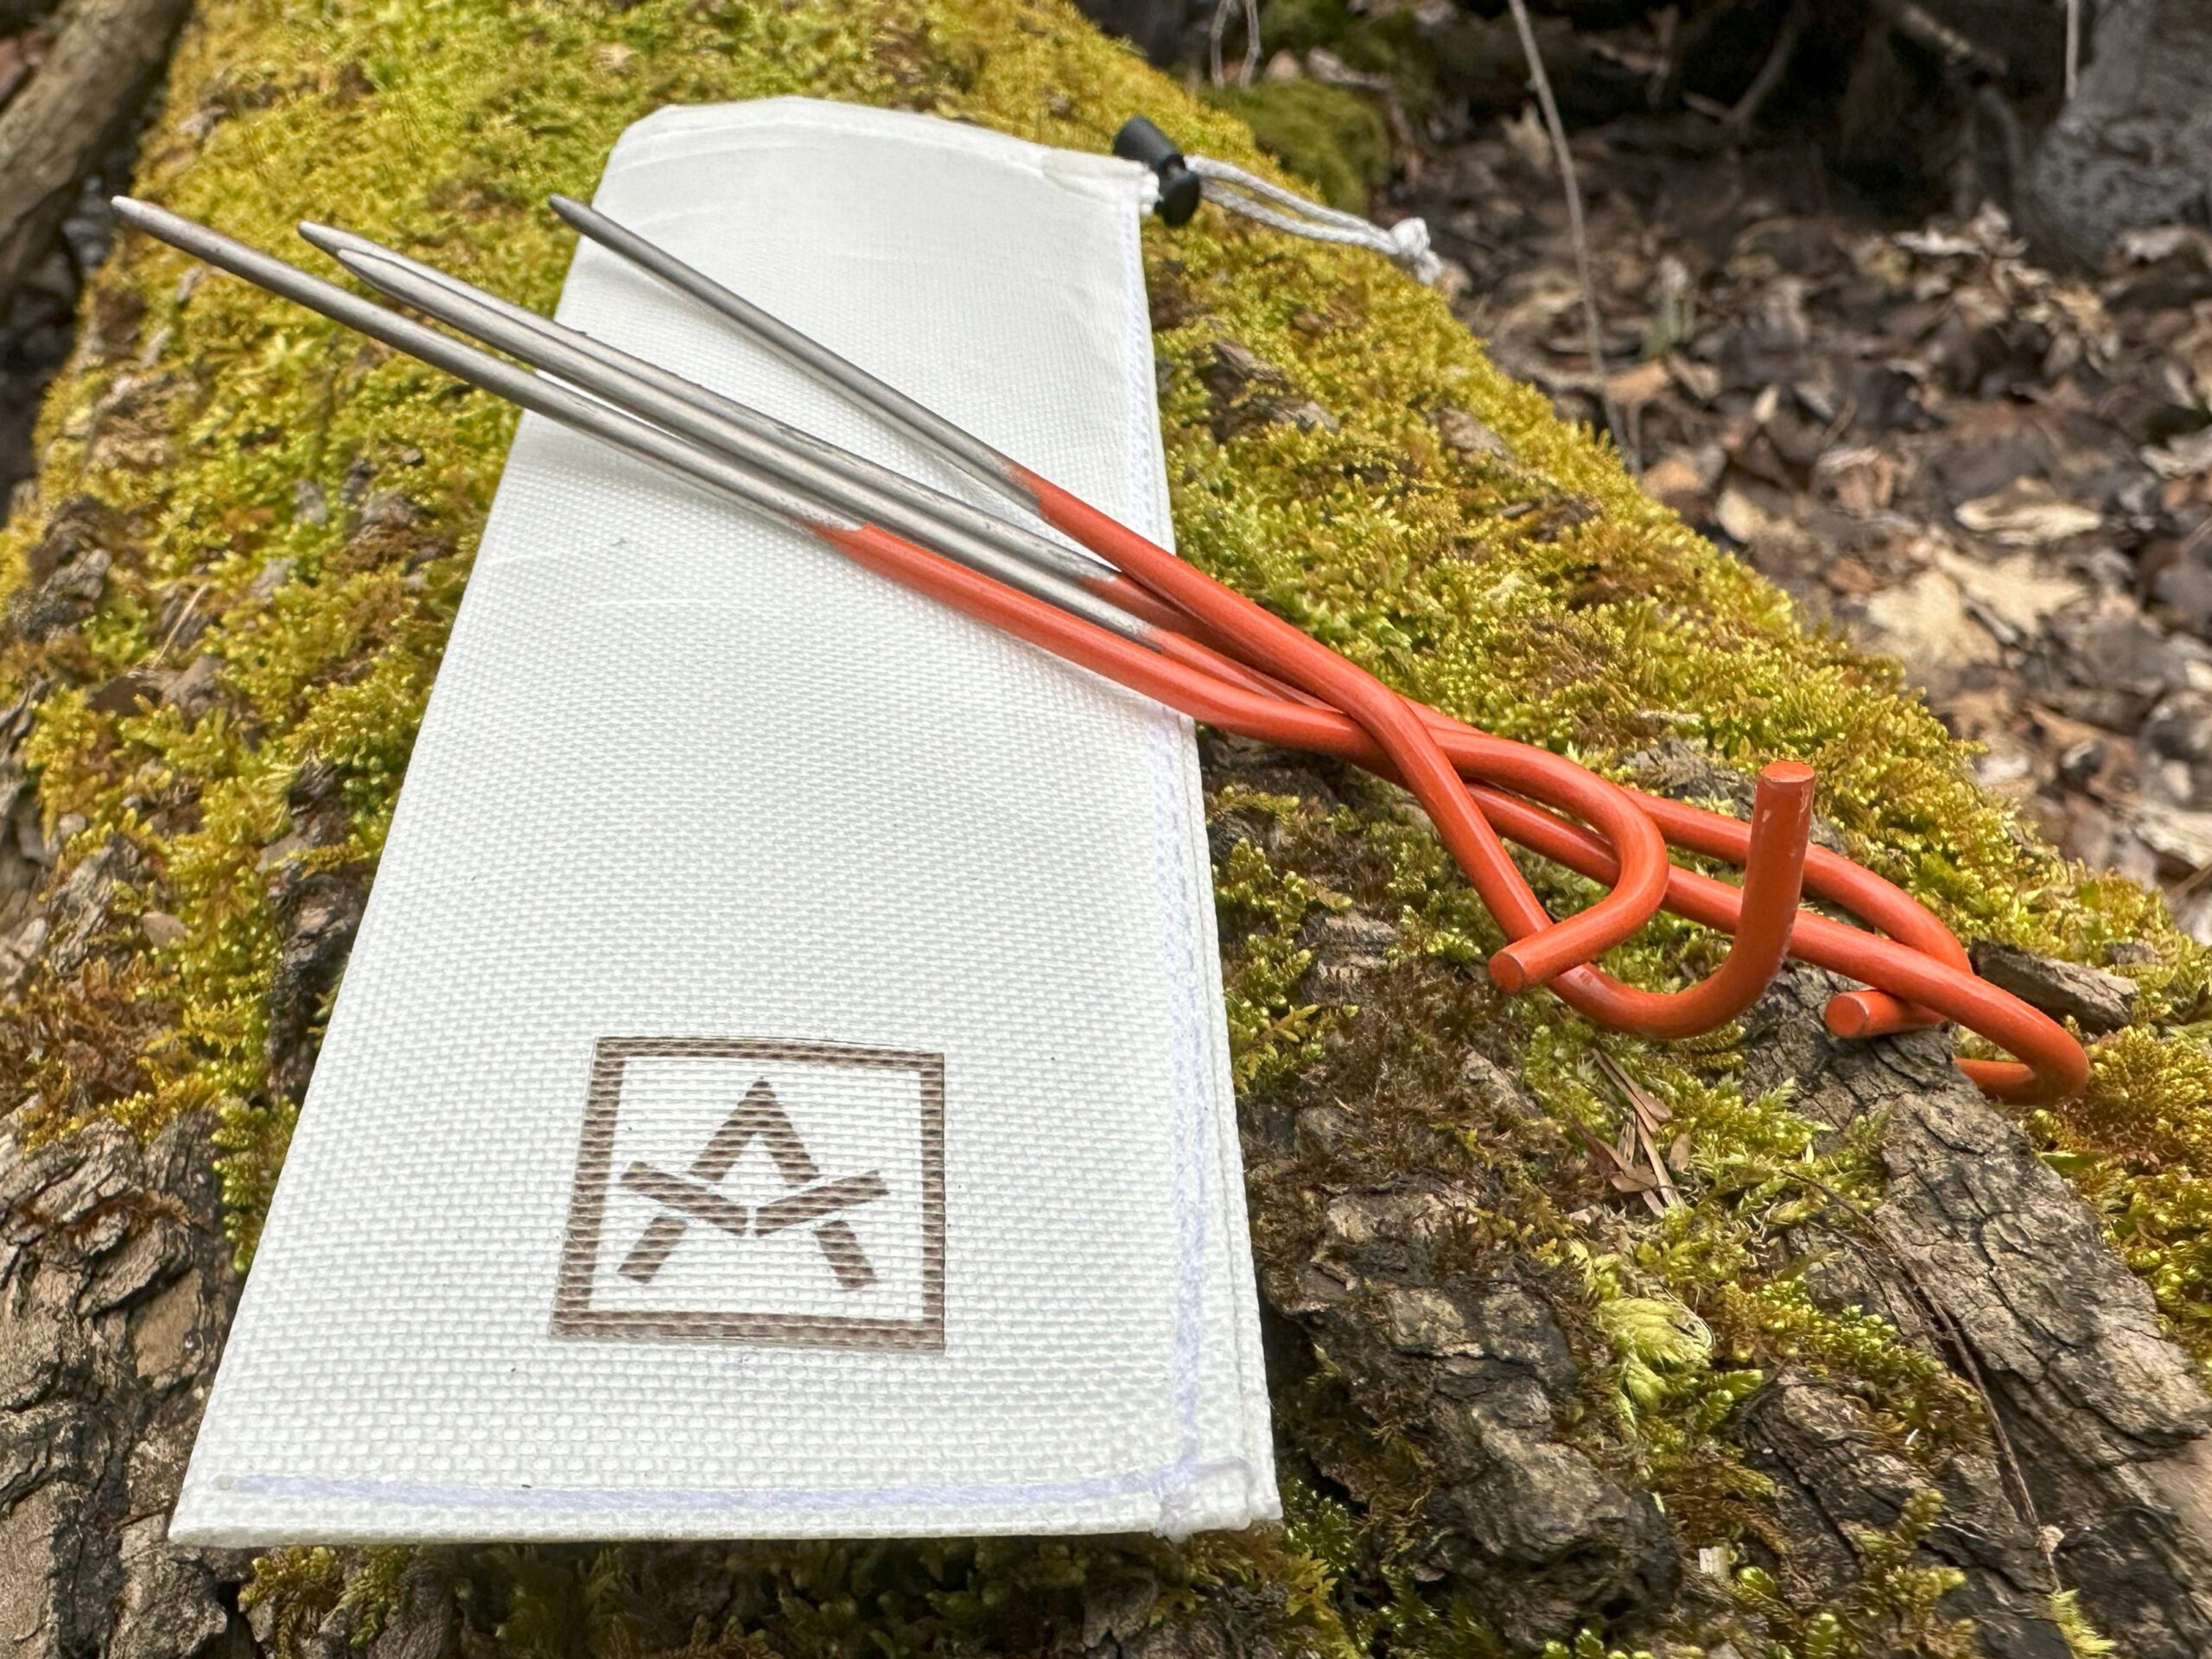 tent stakes and tent stake stuff sack